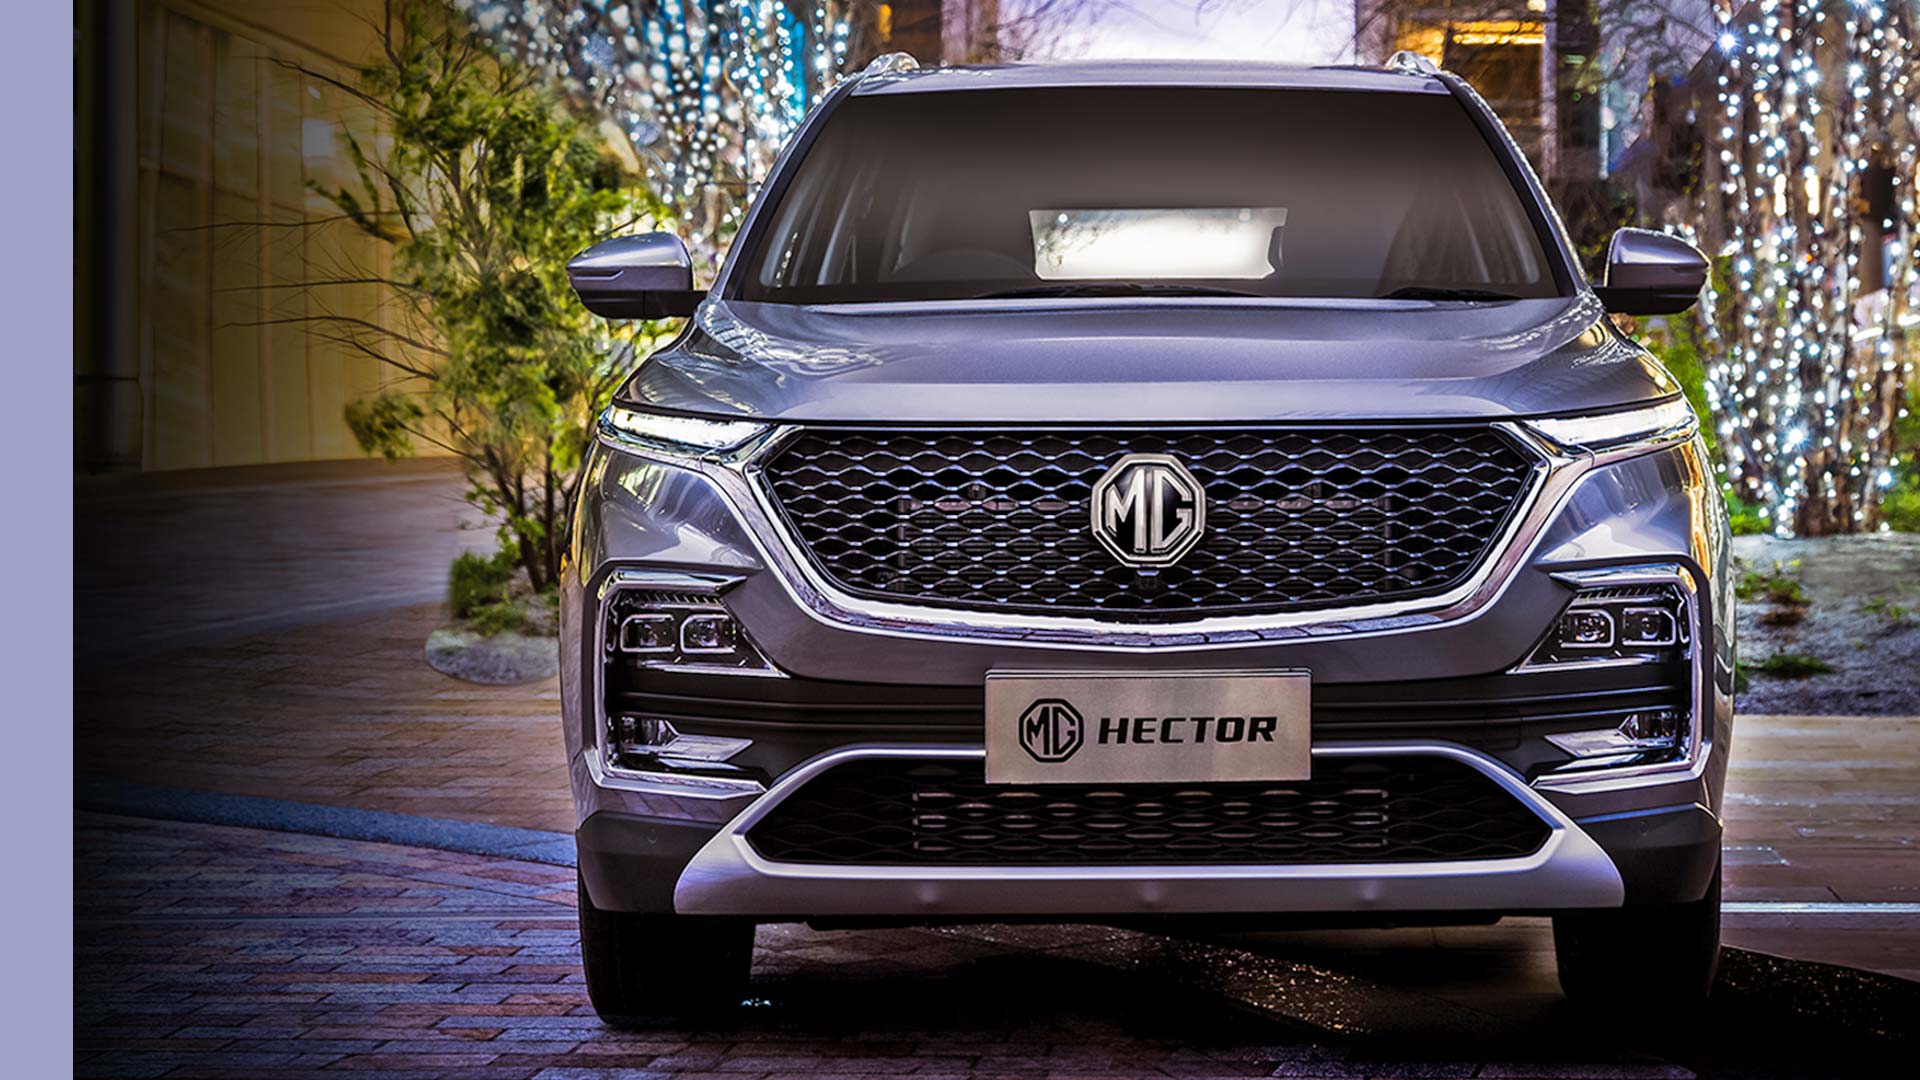 All about the MG Hector: Price in India, Launch Date, Variants